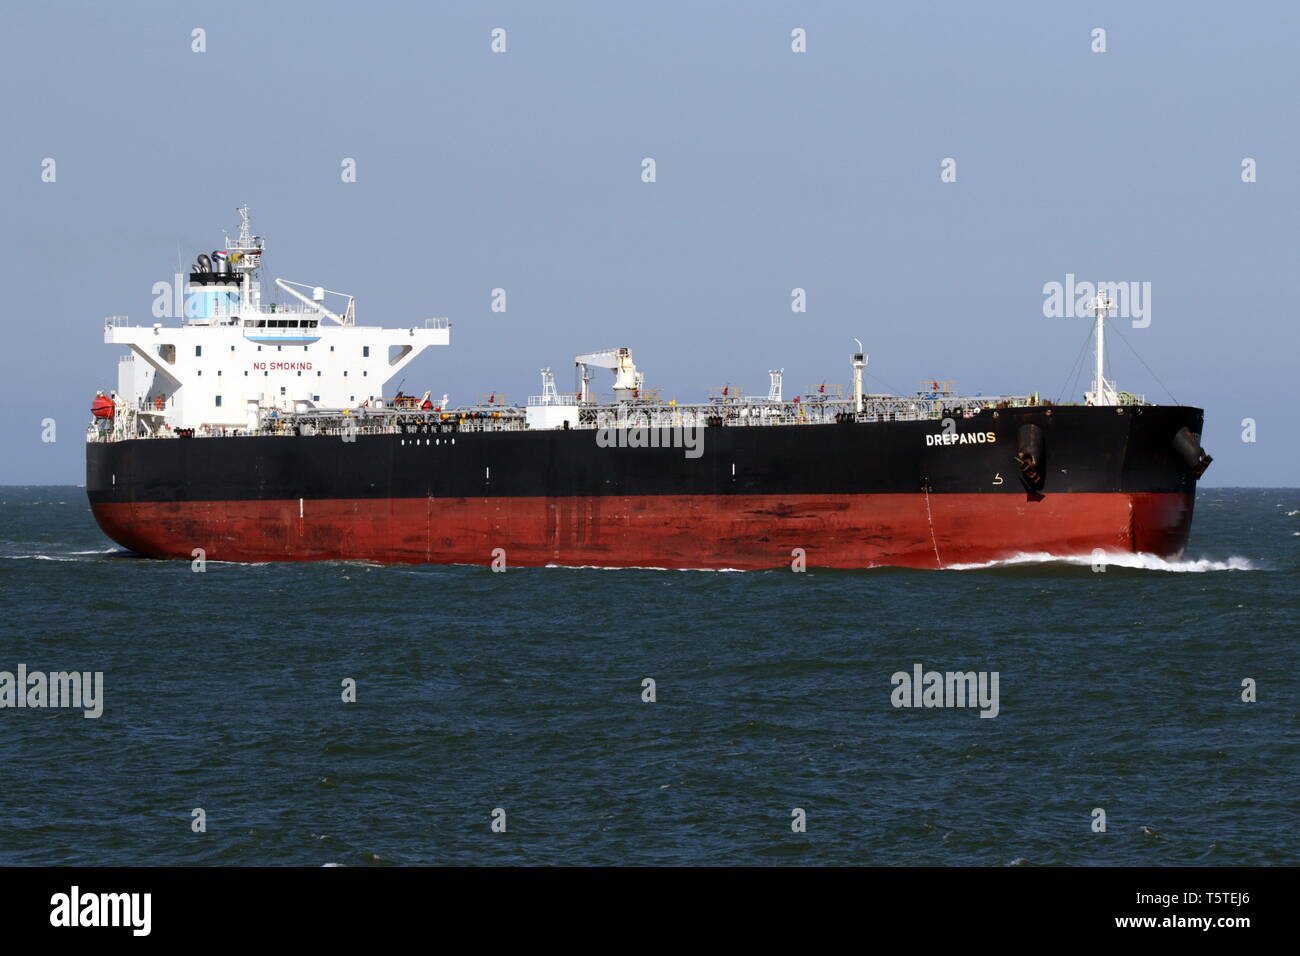 The crude oil tanker Drepanos reaches the port of Rotterdam on April 10, 2019. Stock Photo